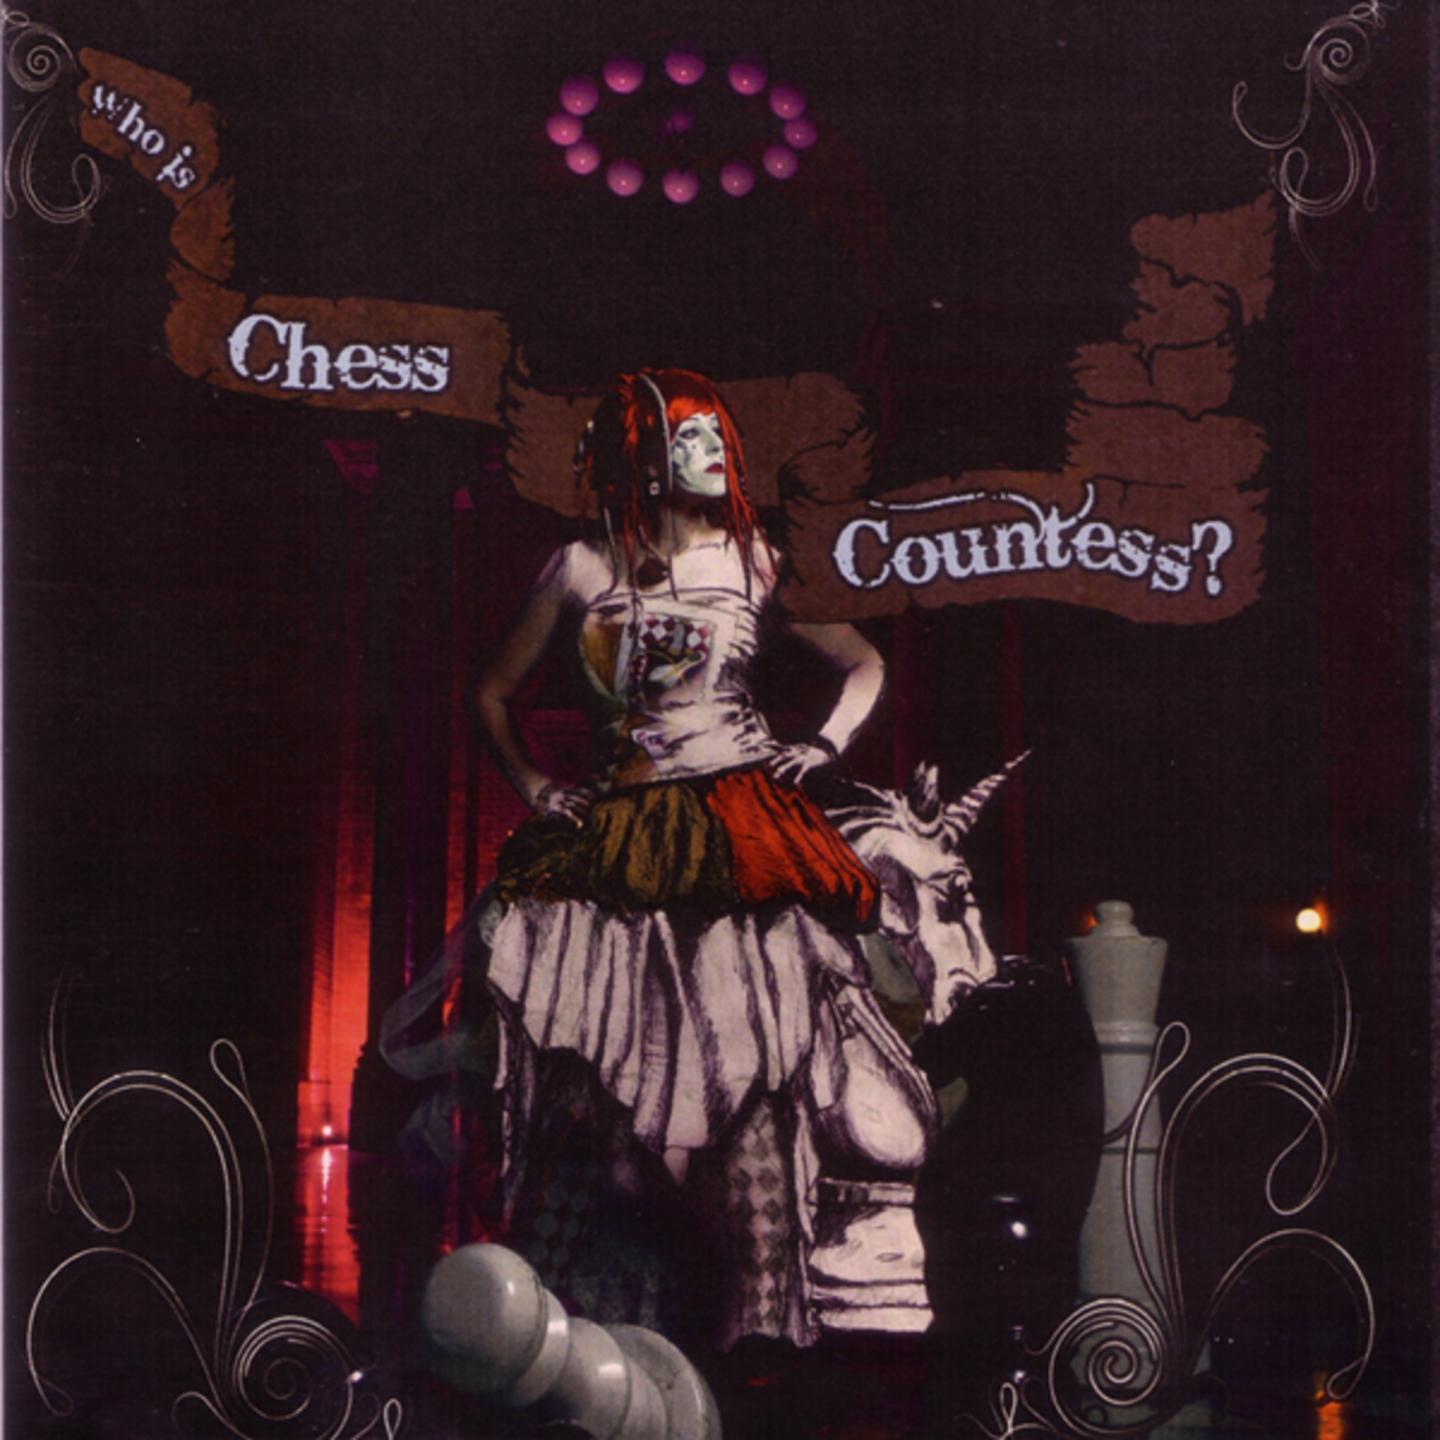 Who Is Chess Countess?